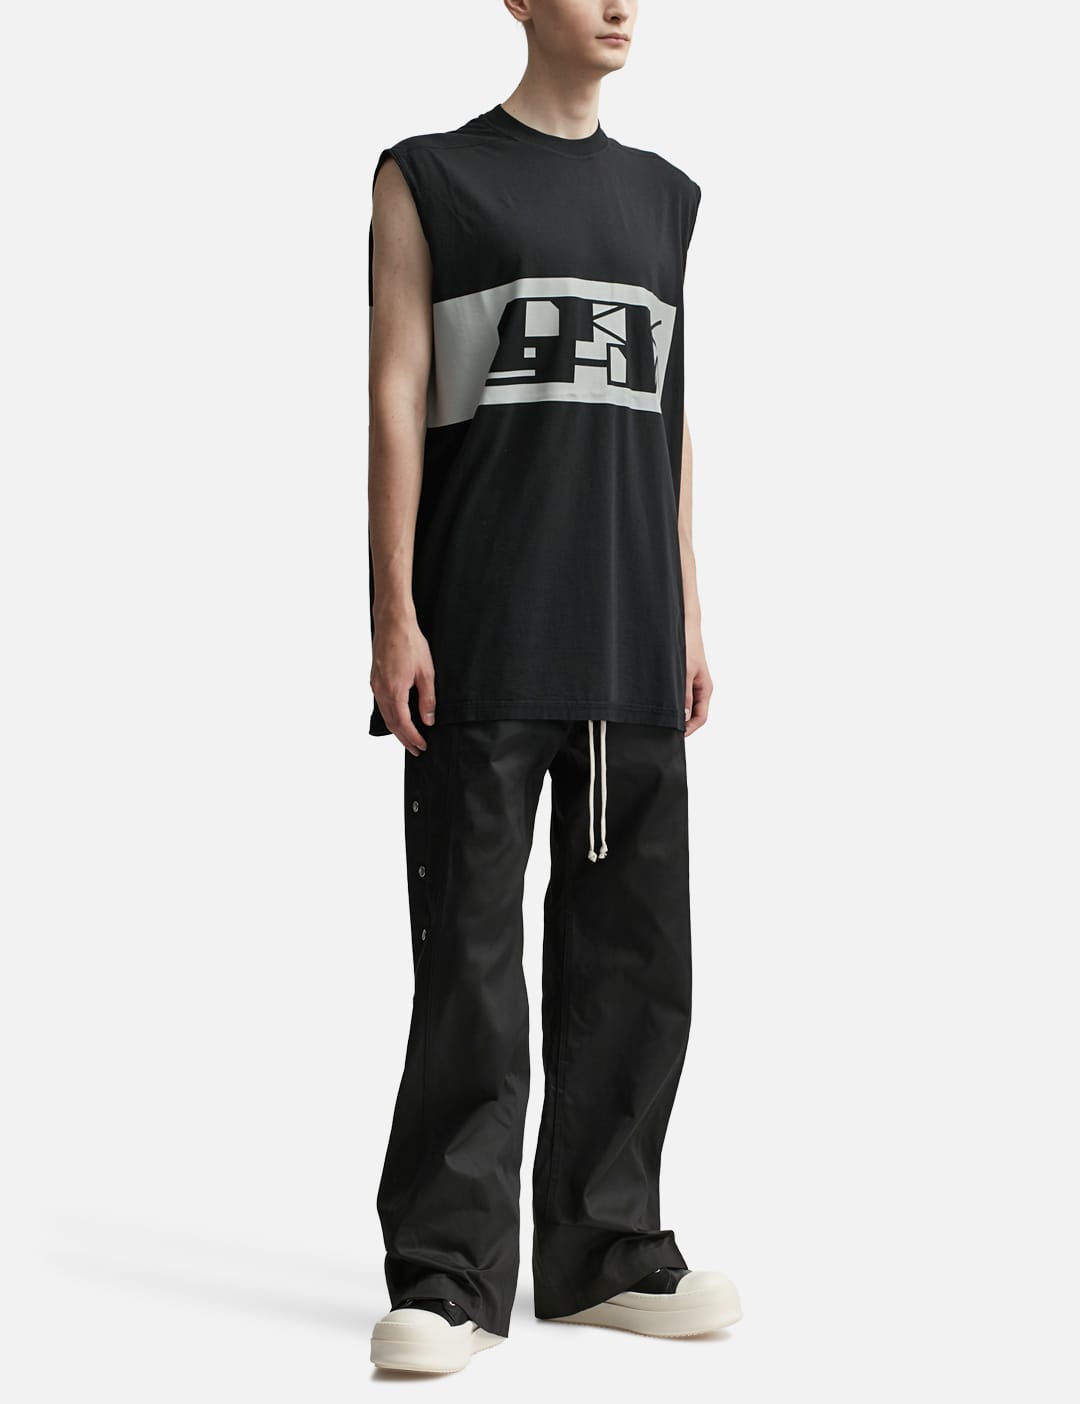 Rick Owens Drkshdw - Pusher Pants | HBX - Globally Curated Fashion 